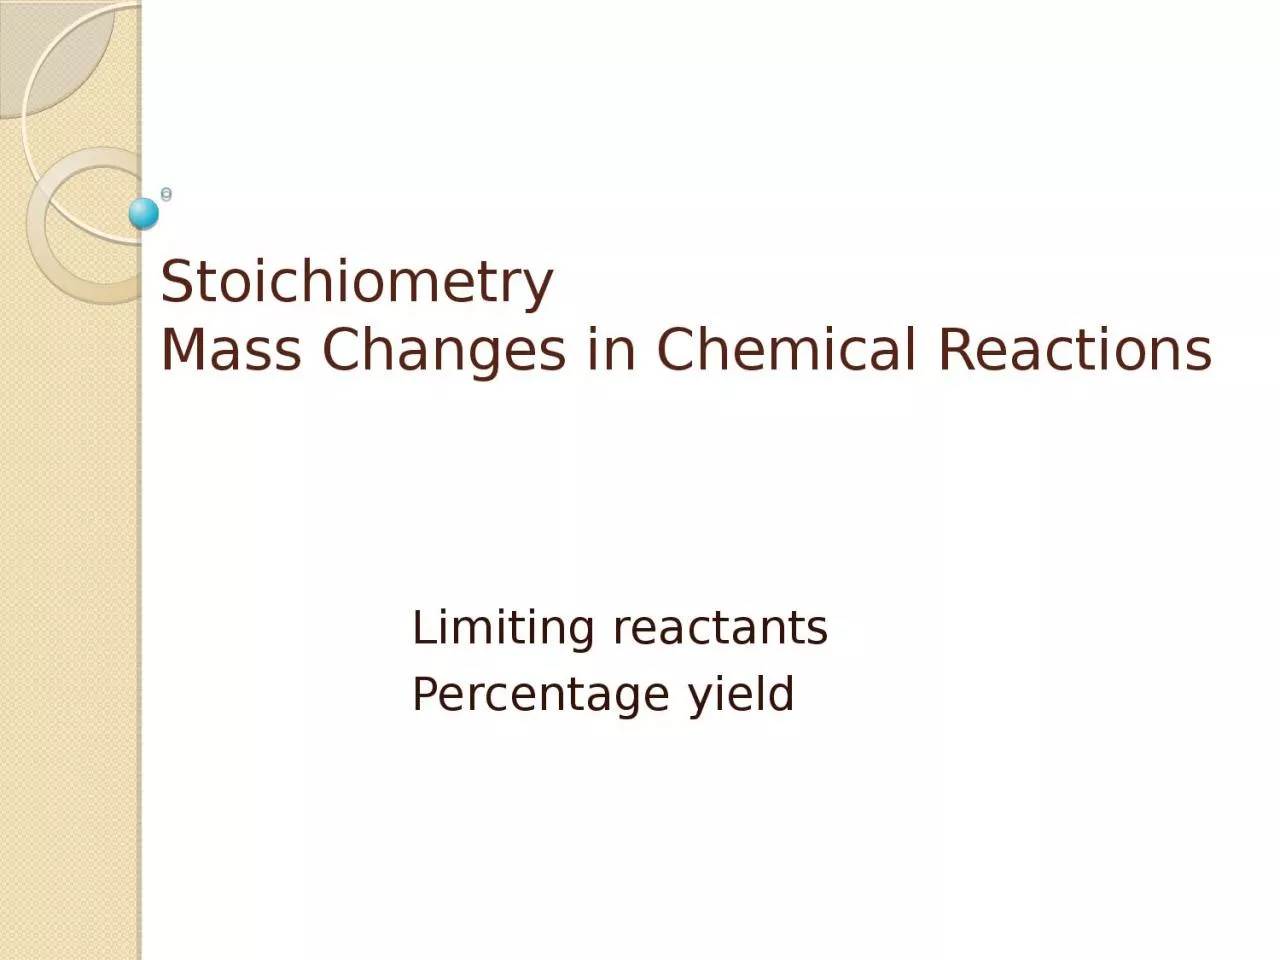 Stoichiometry Mass Changes in Chemical Reactions